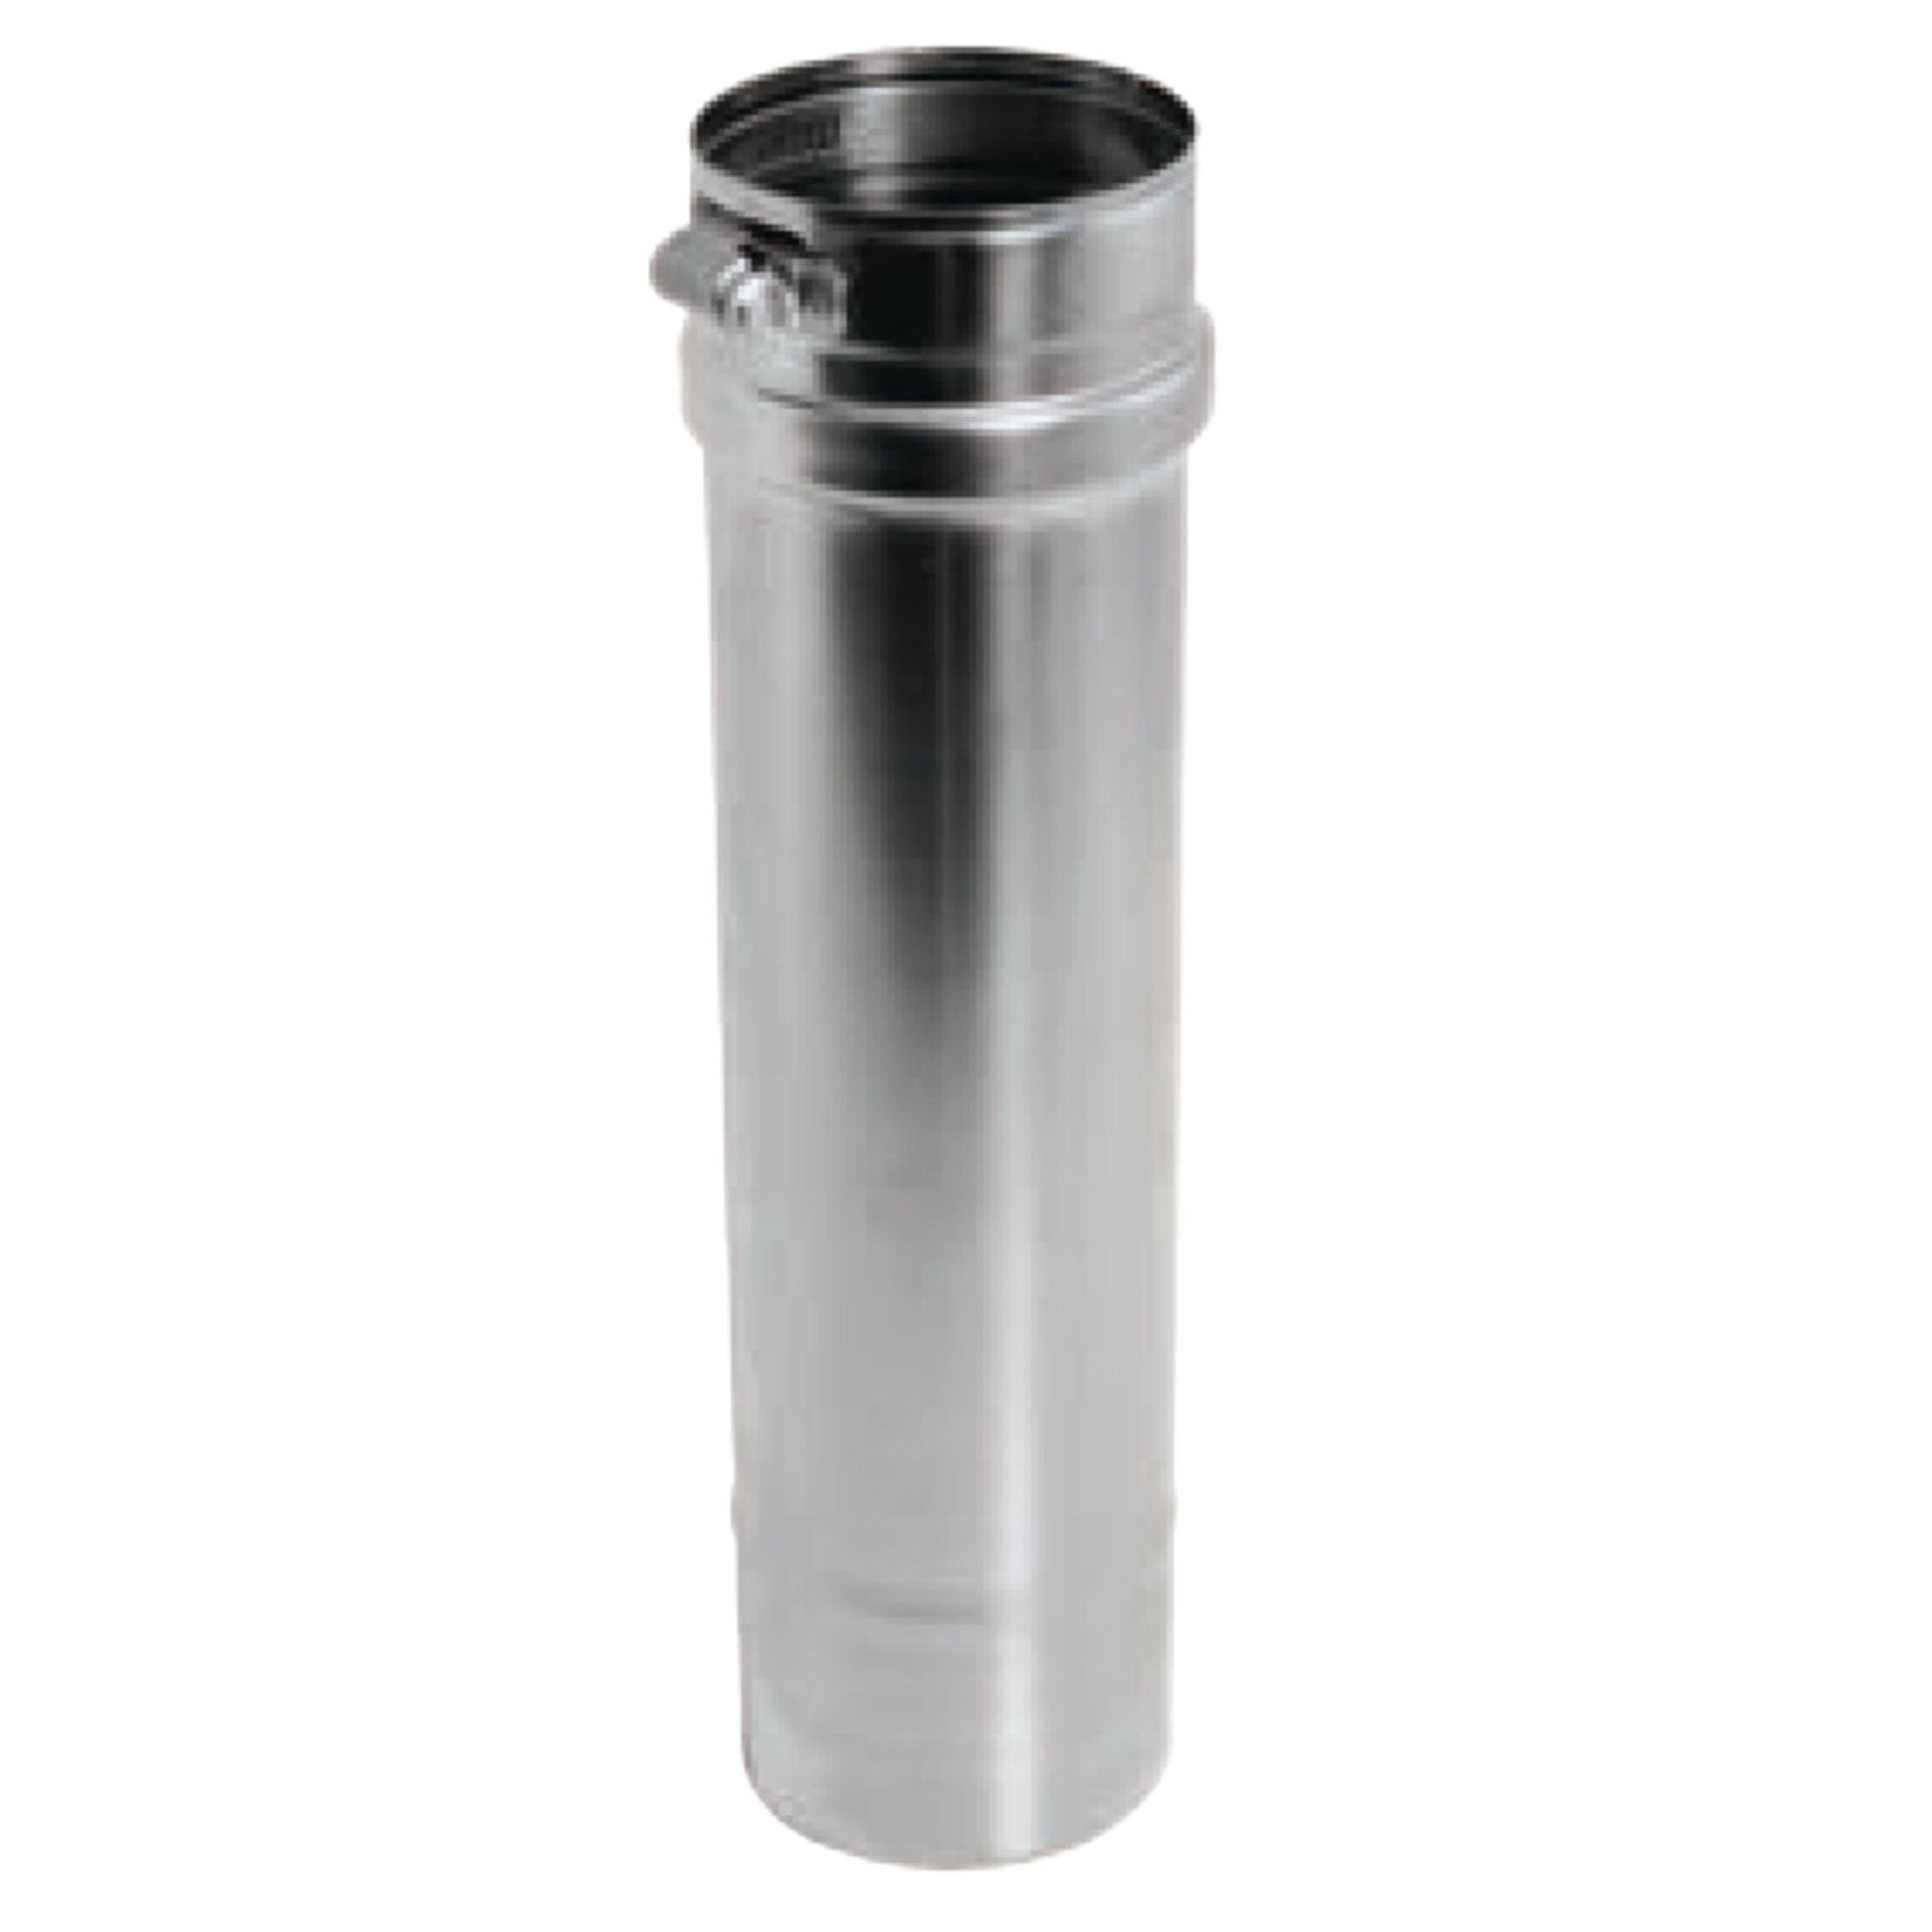 DuraVent FasNSeal 12" x 24" 29-4C Stainless Steel Vent Length